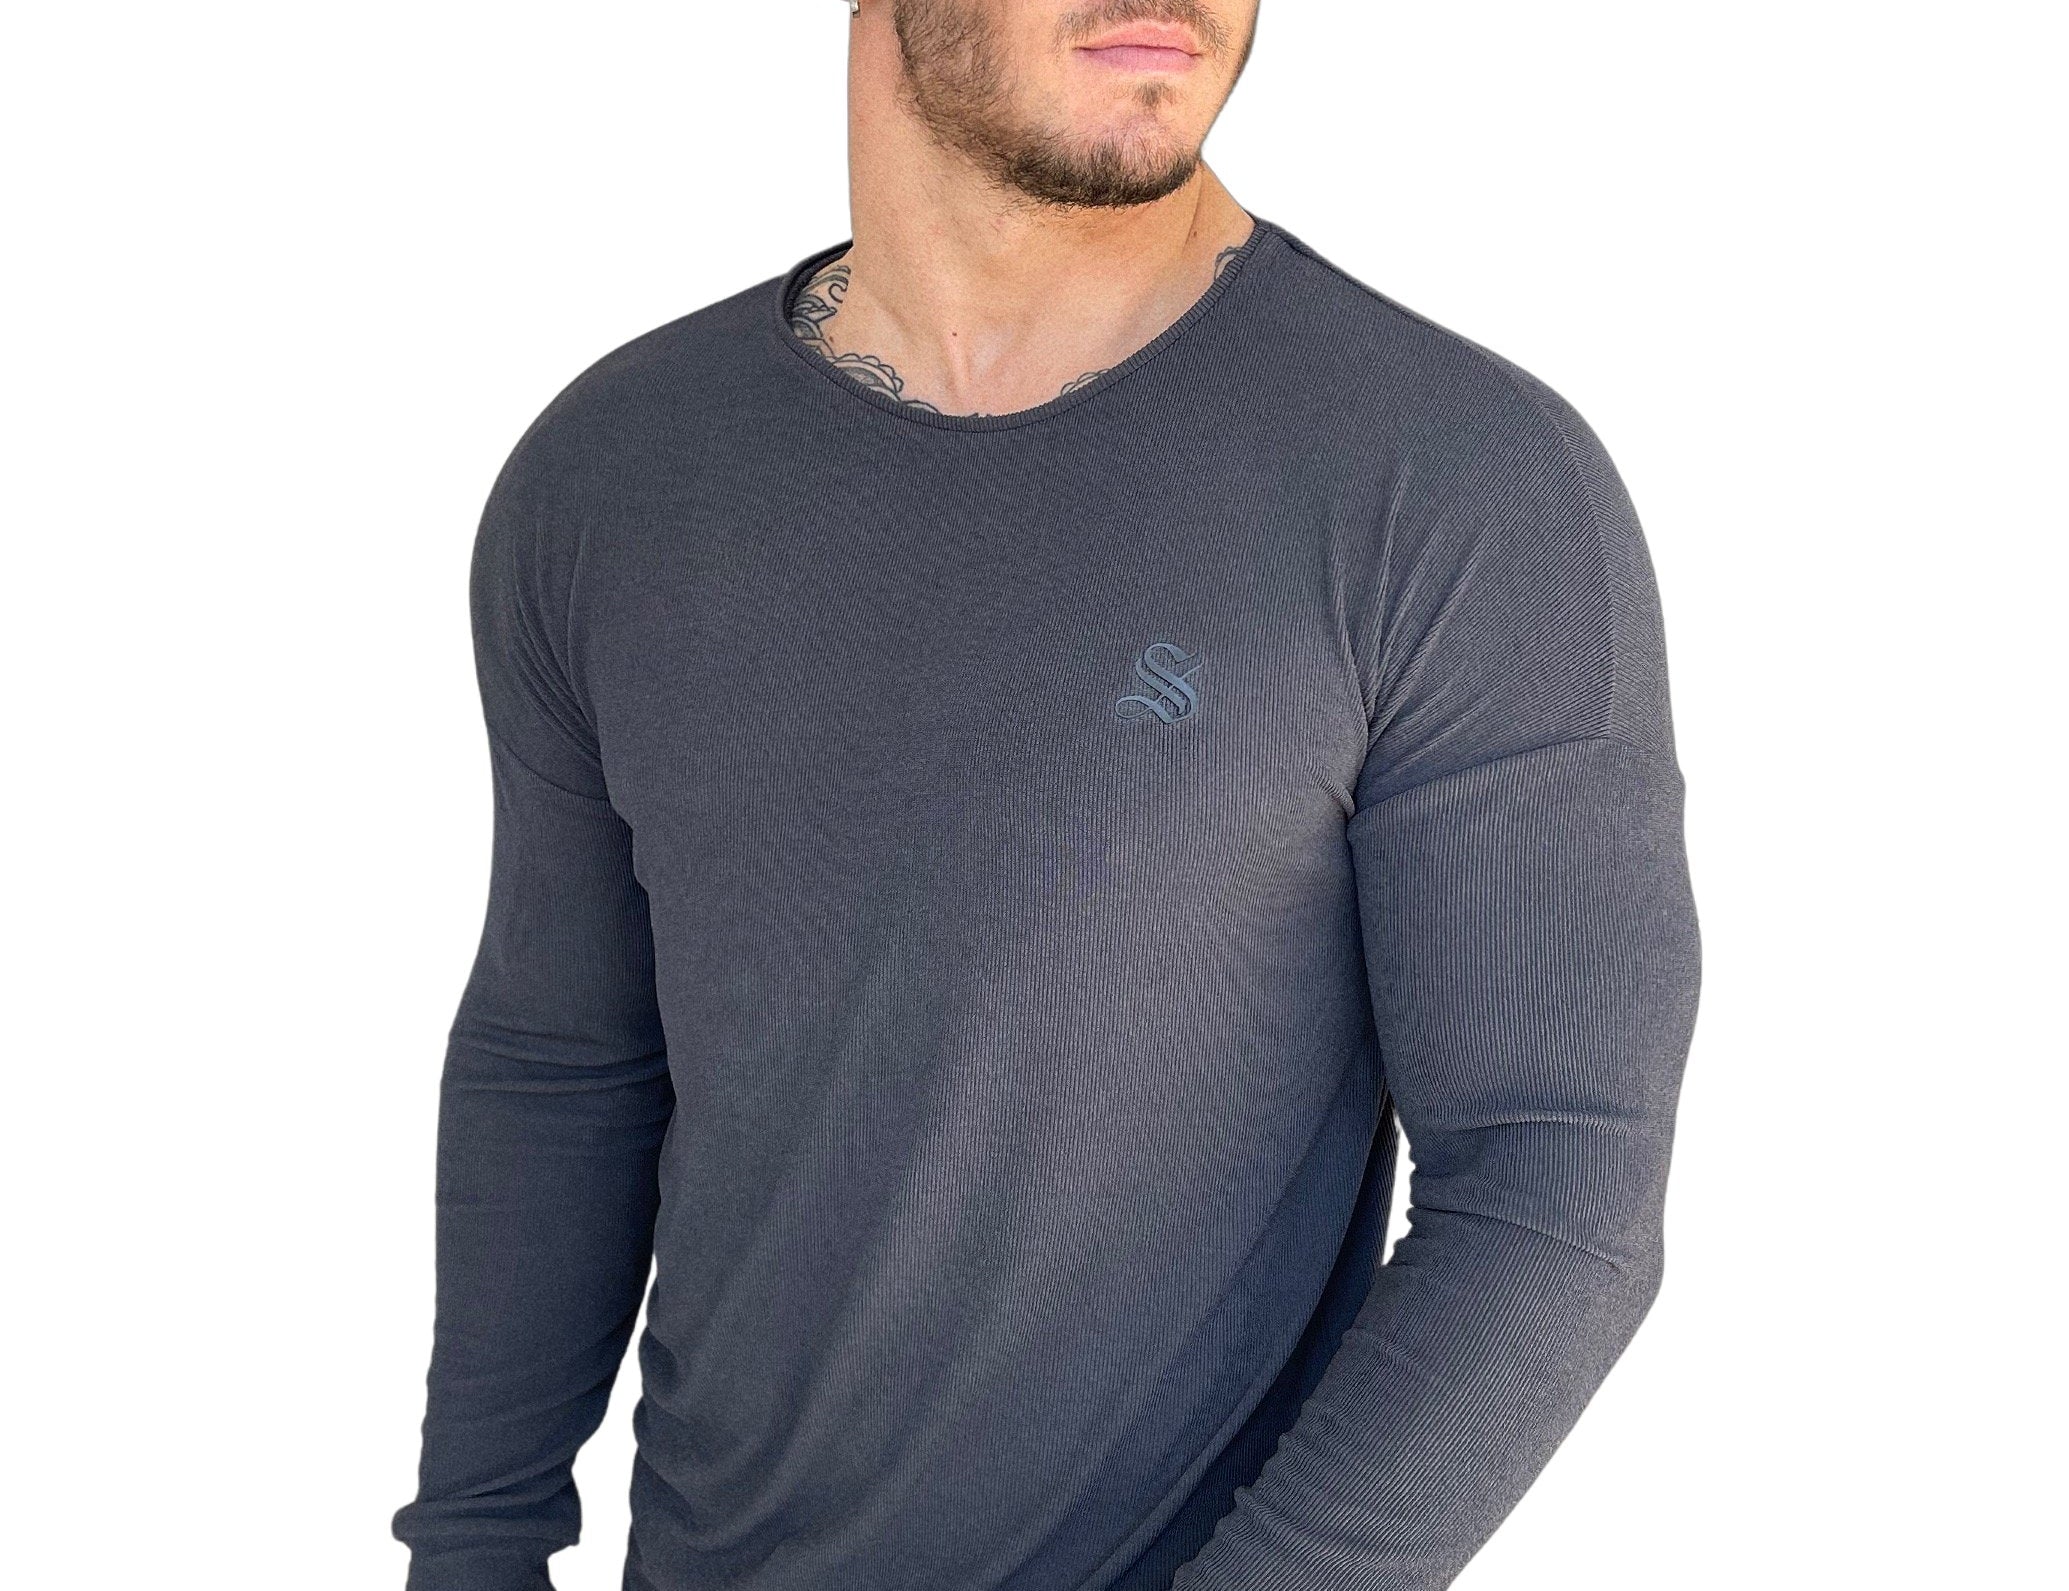 Chimere - Gris Long Sleeve shirt for Men - Sarman Fashion - Wholesale Clothing Fashion Brand for Men from Canada